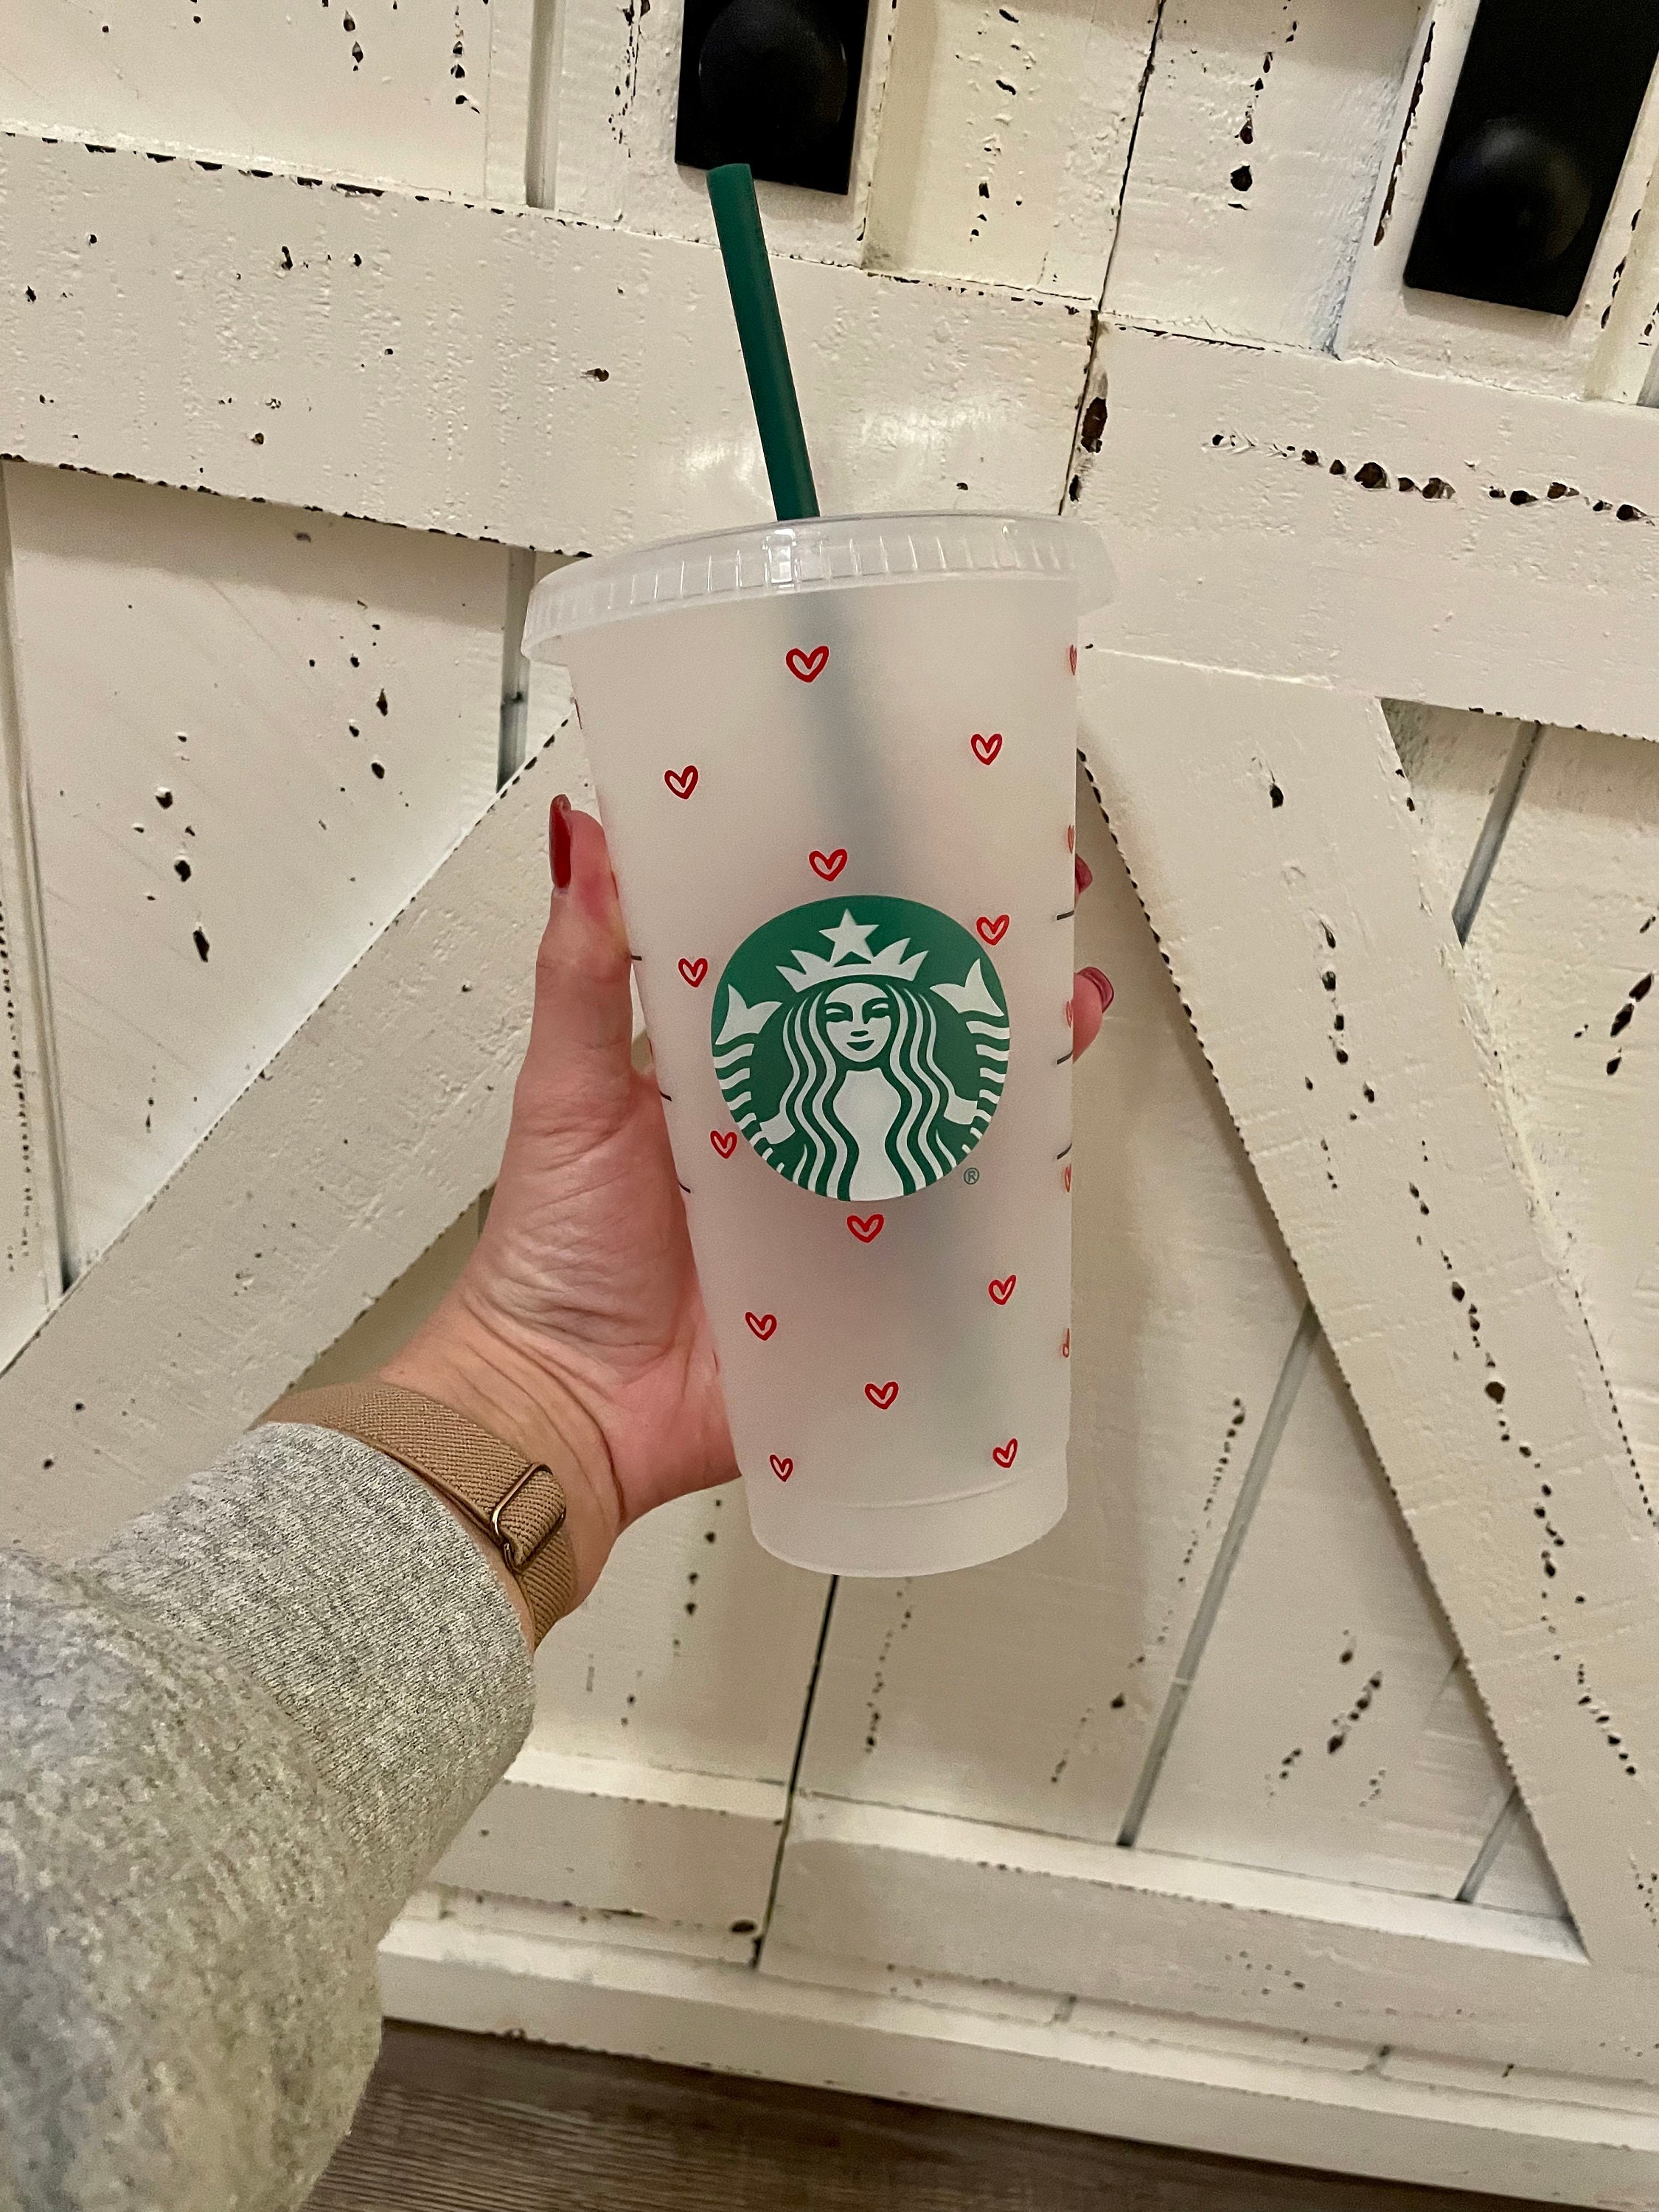 Personalized Starbucks Cup Decals w/Hearts Accents – Fancy Plans Co